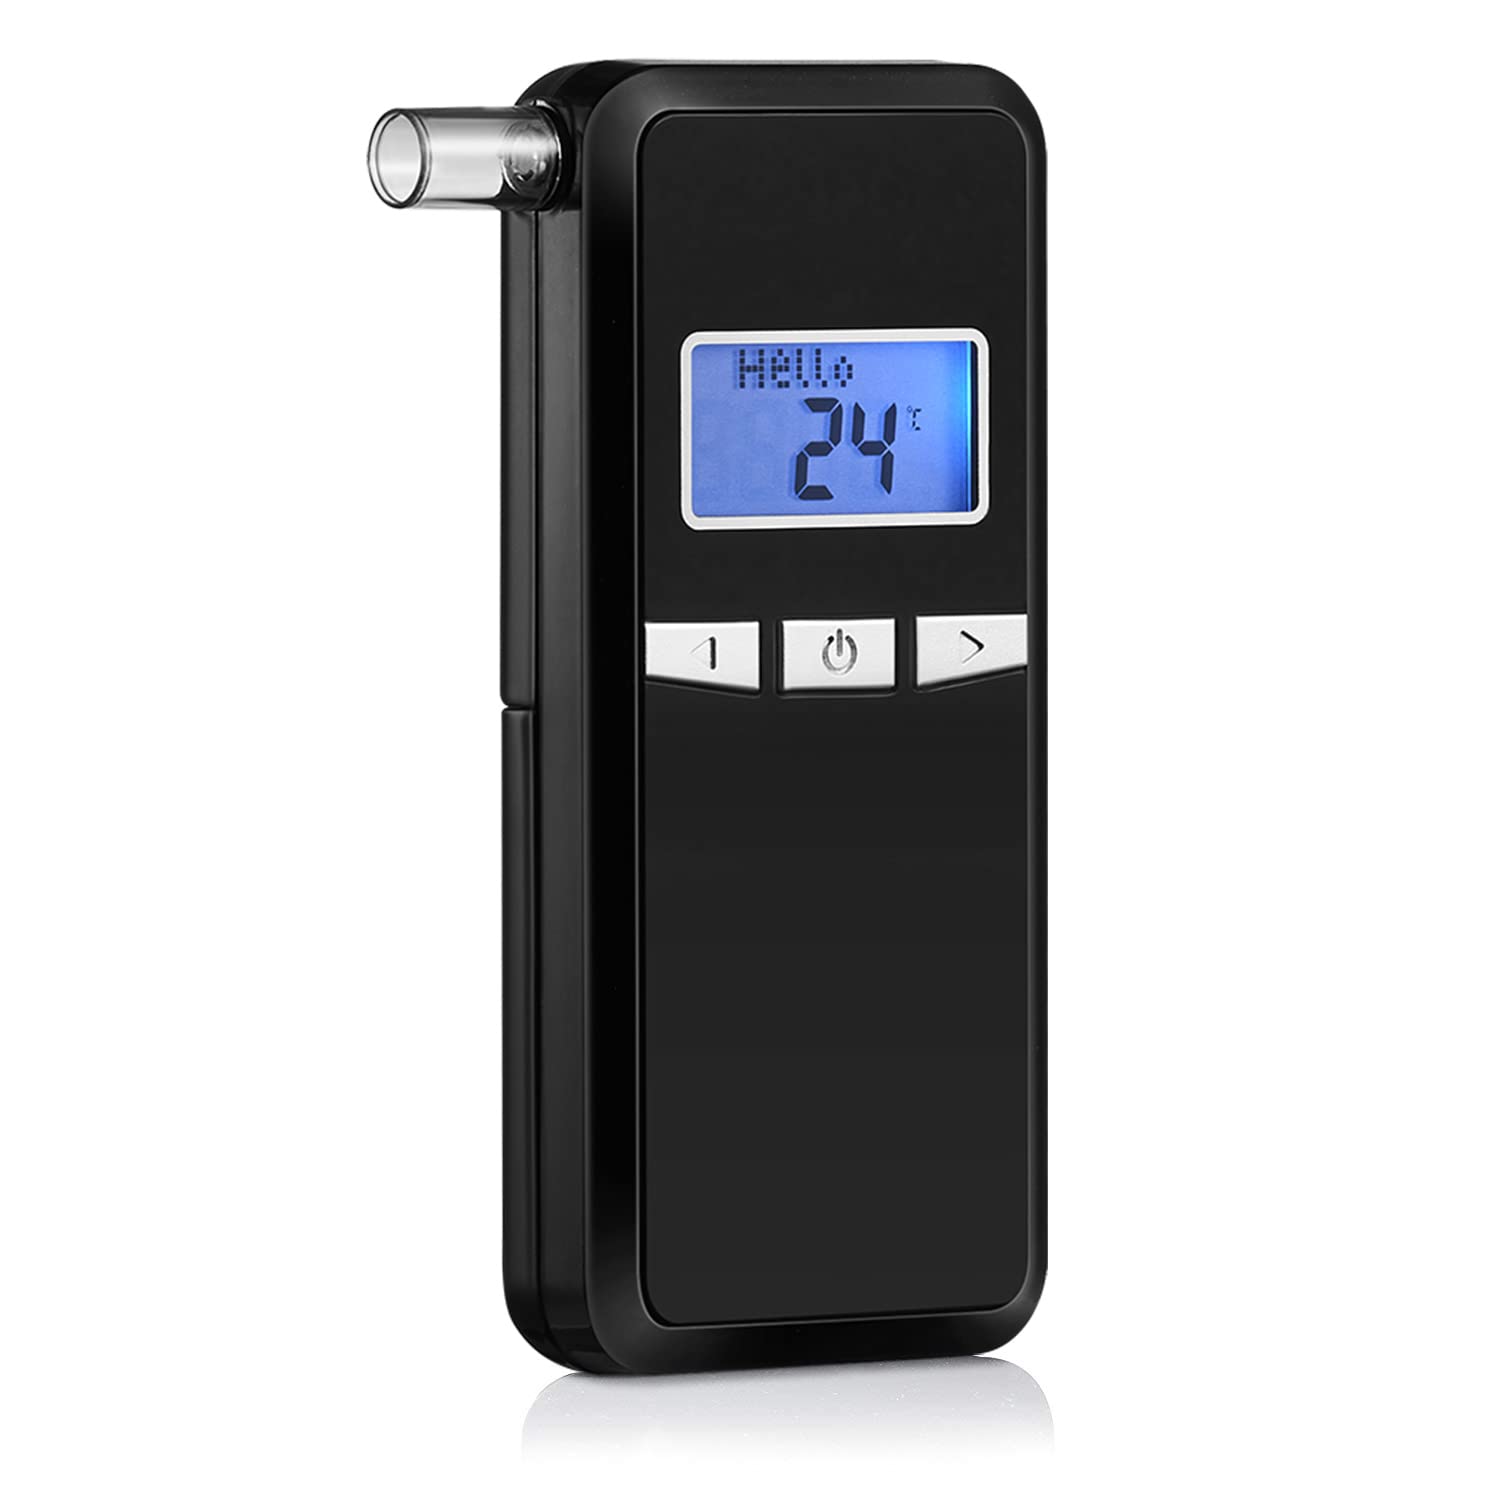 Breathalyzer & 10 Mouthpieces, Accurate Portable Handheld breathalyzer  Breath Alcohol Tester for Personal & Professional Use Digital LCD Display